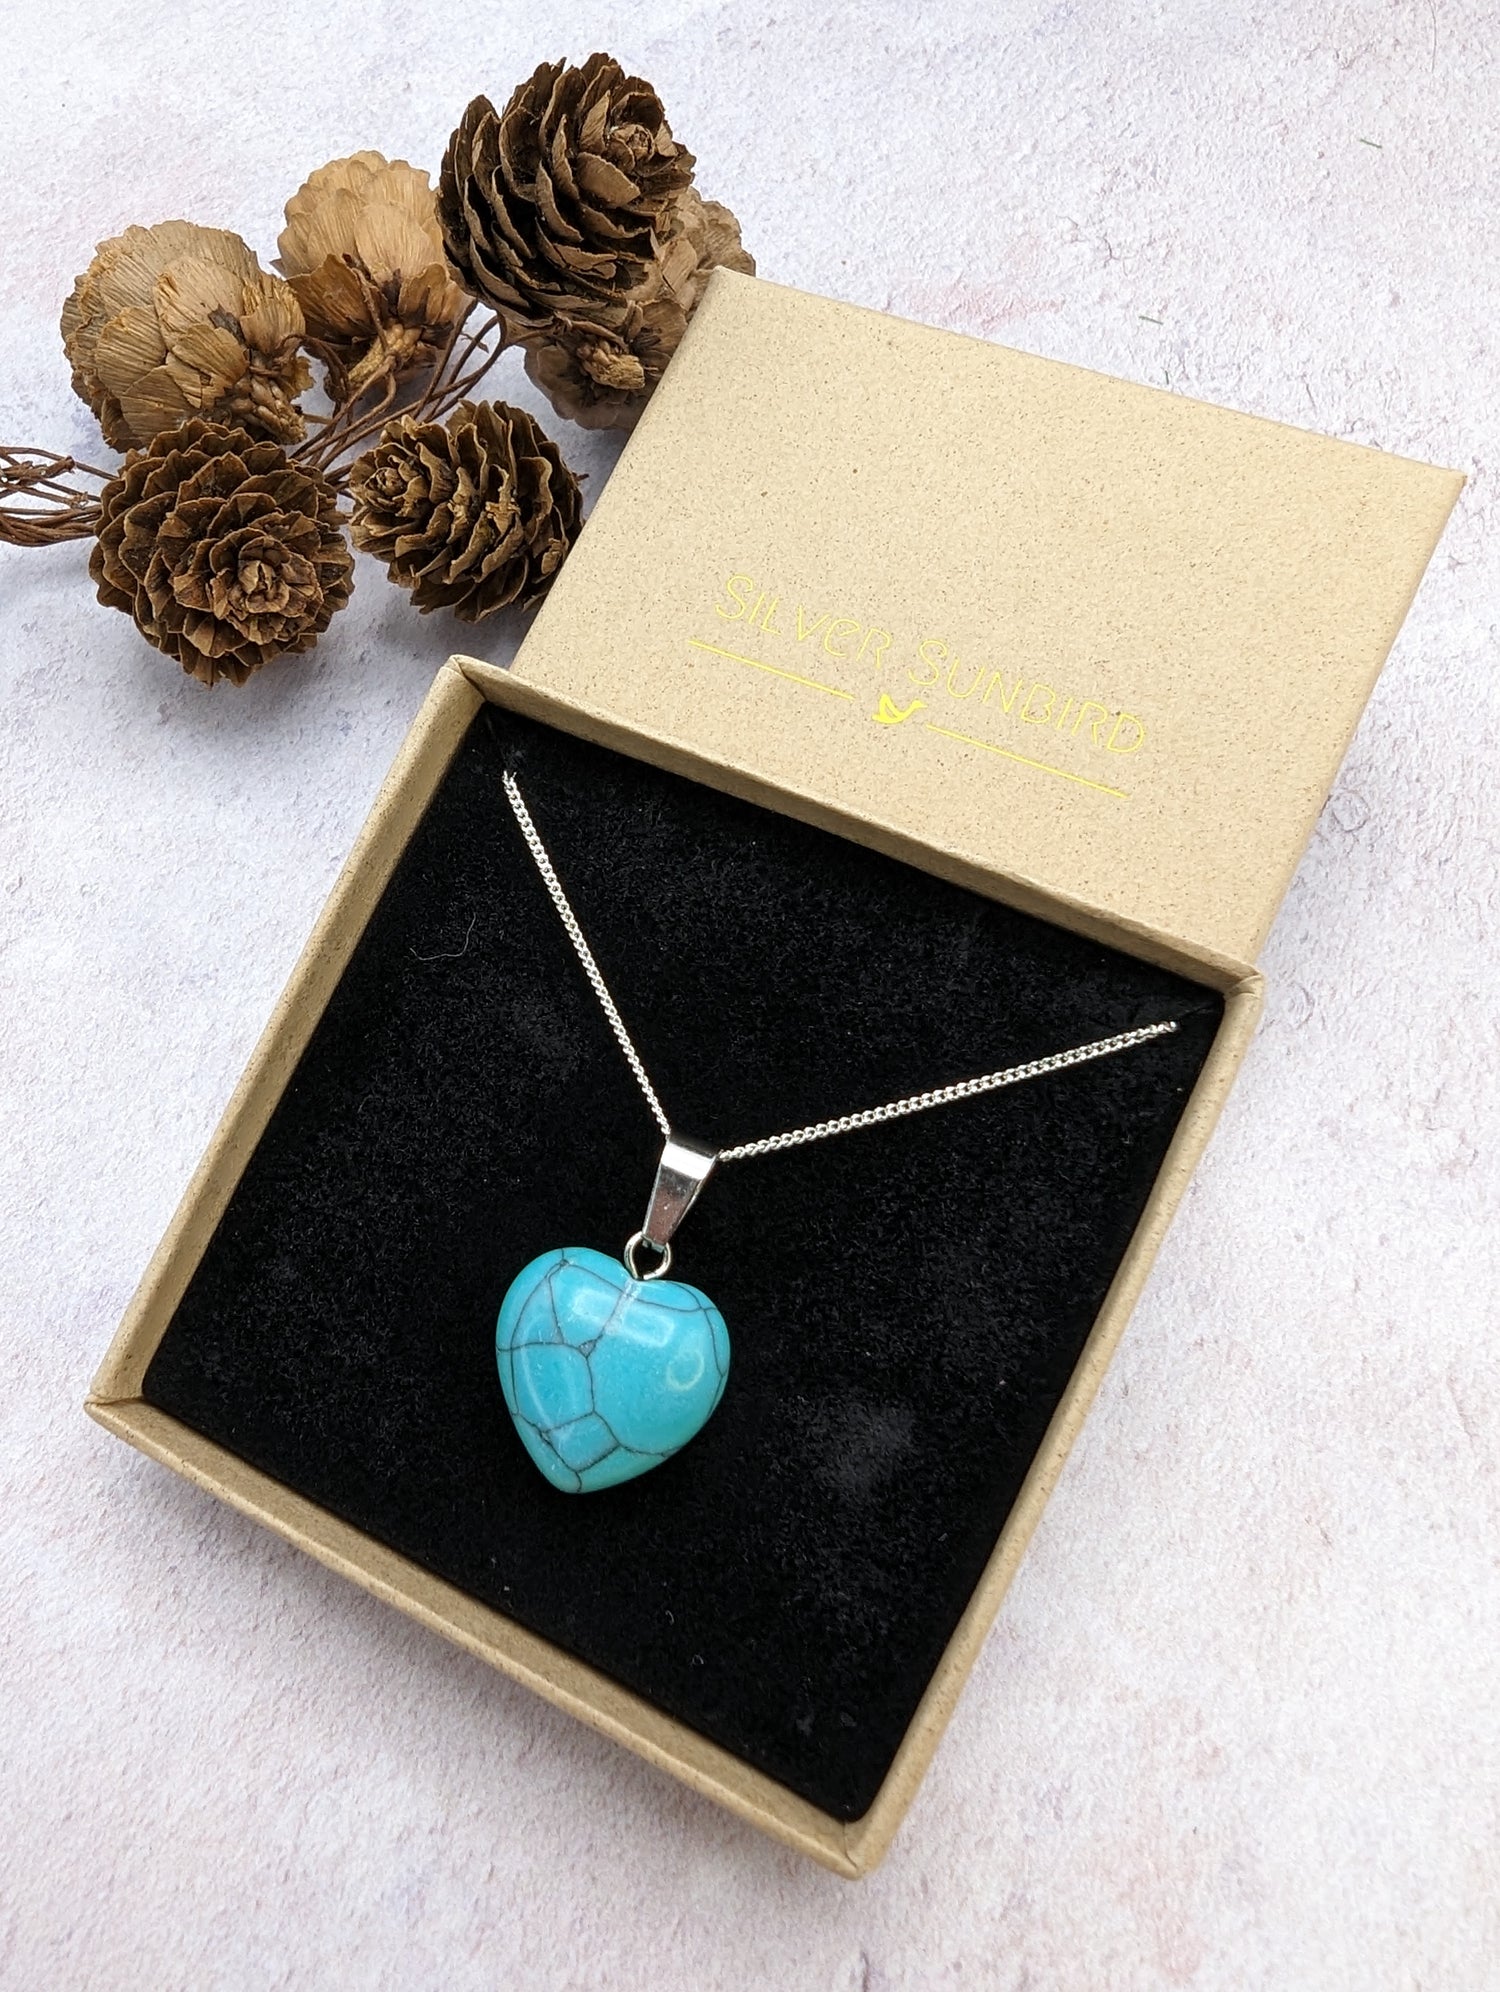 Turquoise Heart Necklace - Silver Sunbird Bohemian